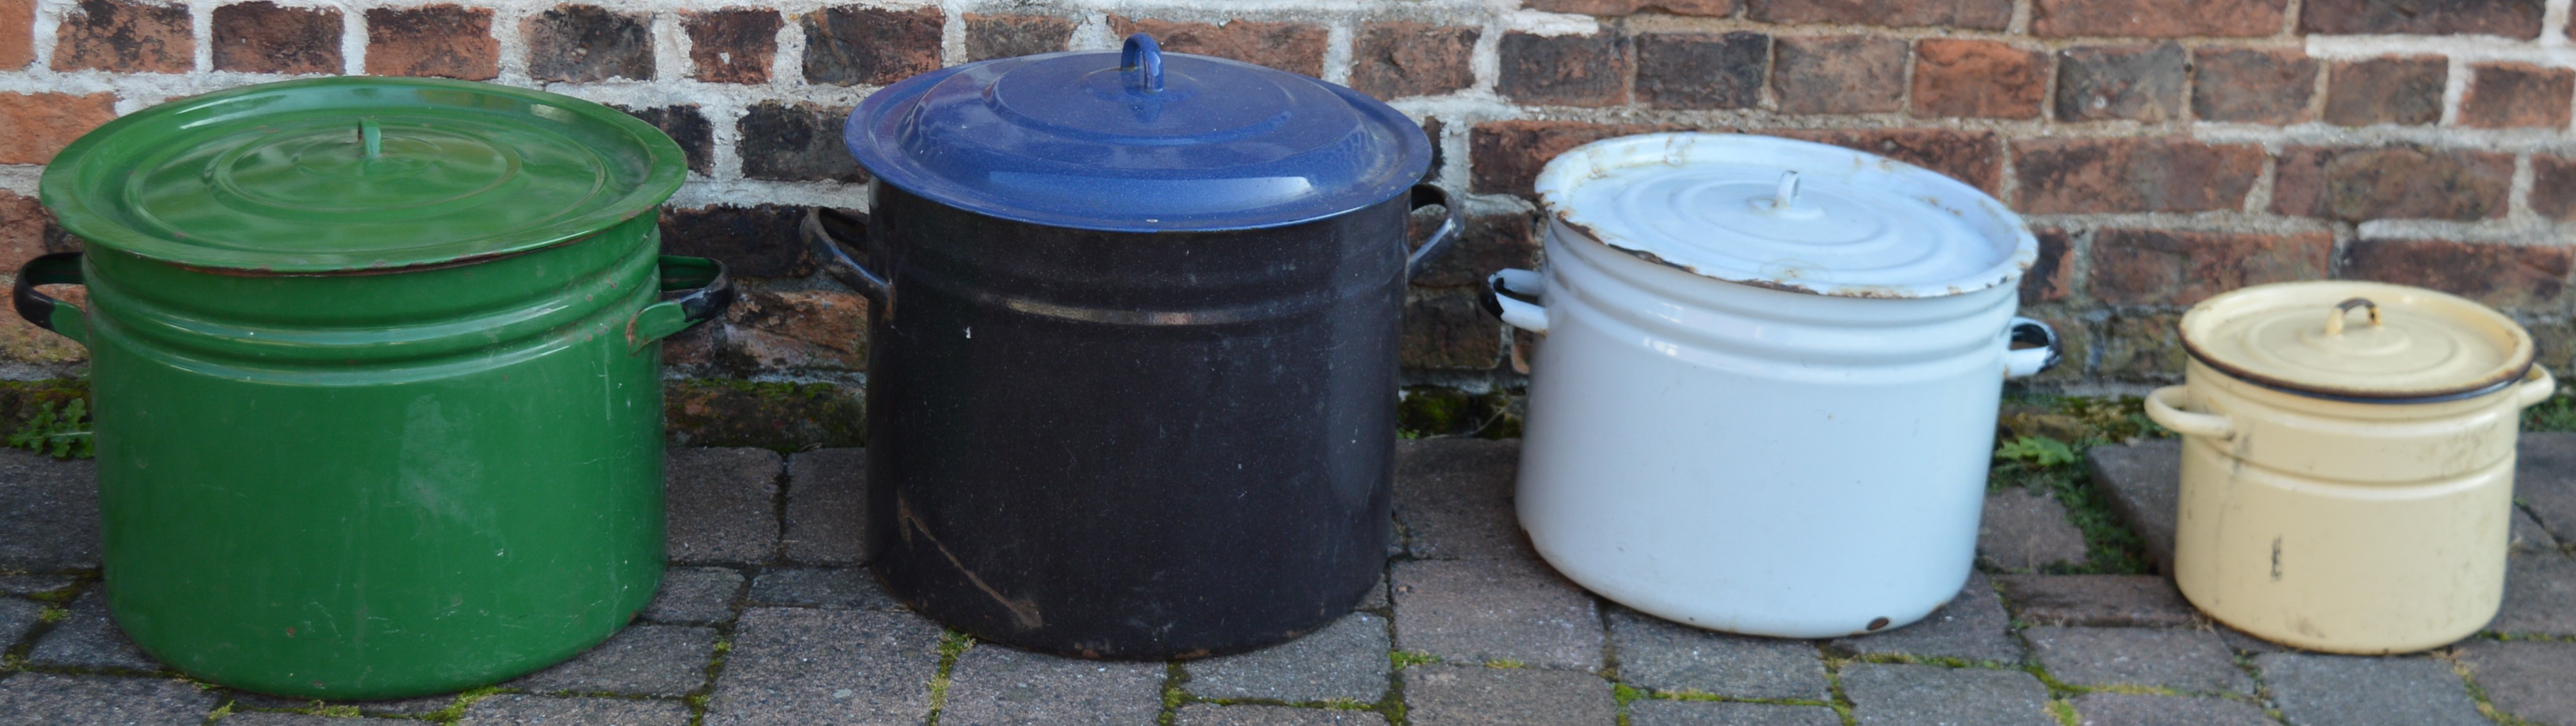 3 large enamel cooking pots and one smaller